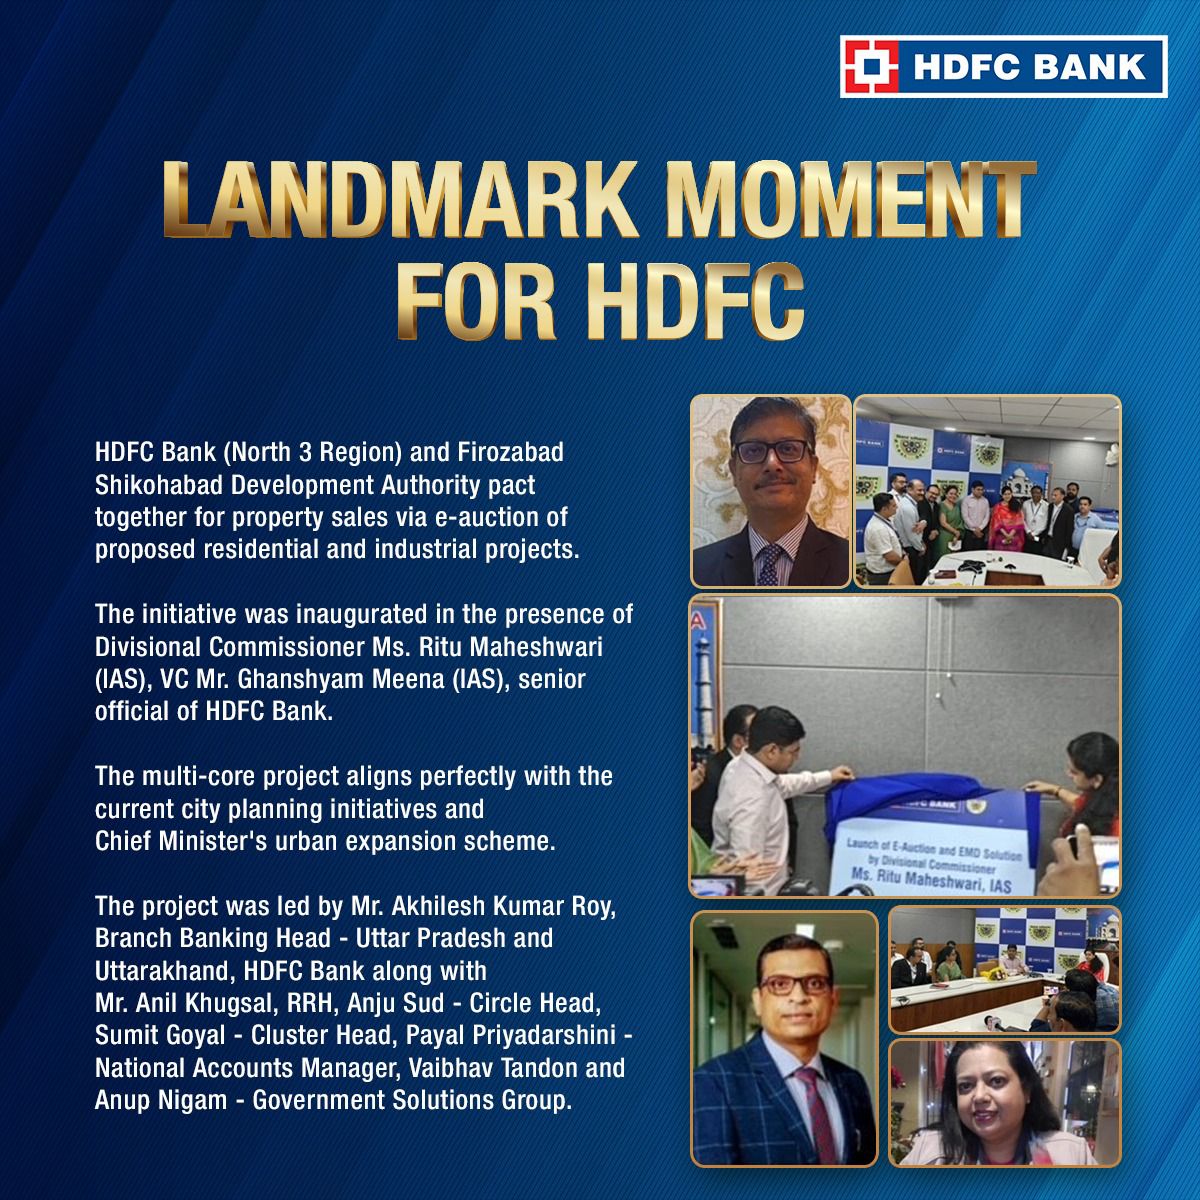 HDFC Bank (North 3 Region) and Firozabad Shikohabad Development Authority pact together for property sales via e-auction of proposed residential and industrial projects. #HDCBank #News #LandmarkMoment